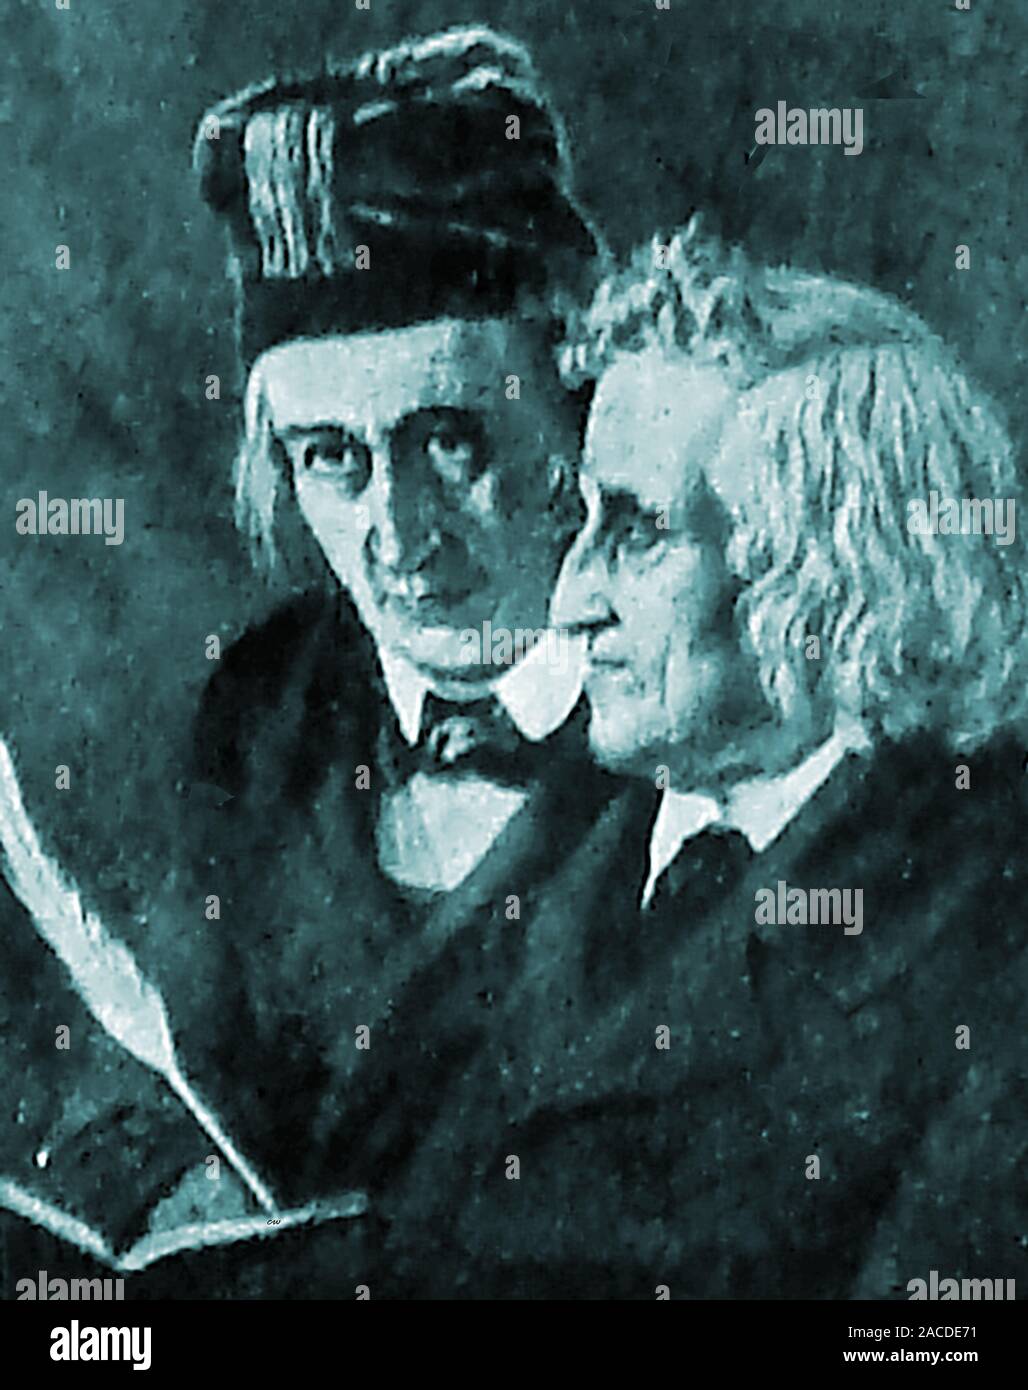 An early printed photograph of the Brothers Grimm (Jakob & Wilhelm) known in German as die Brüder Grimm or die Gebrüder Grimm. Jacob Ludwig Karl (1785–1863) and Wilhelm Carl (1786–1859), were German academics and authors who collected and published folklore during the 19th century, bringing us some of our best known fairy tales such as Cinderella, Snow White,Rapunzel, Rumpelstiltskin, Hansel & Gretel, Sleeping Beauty and Snow White (to name only few). Stock Photo